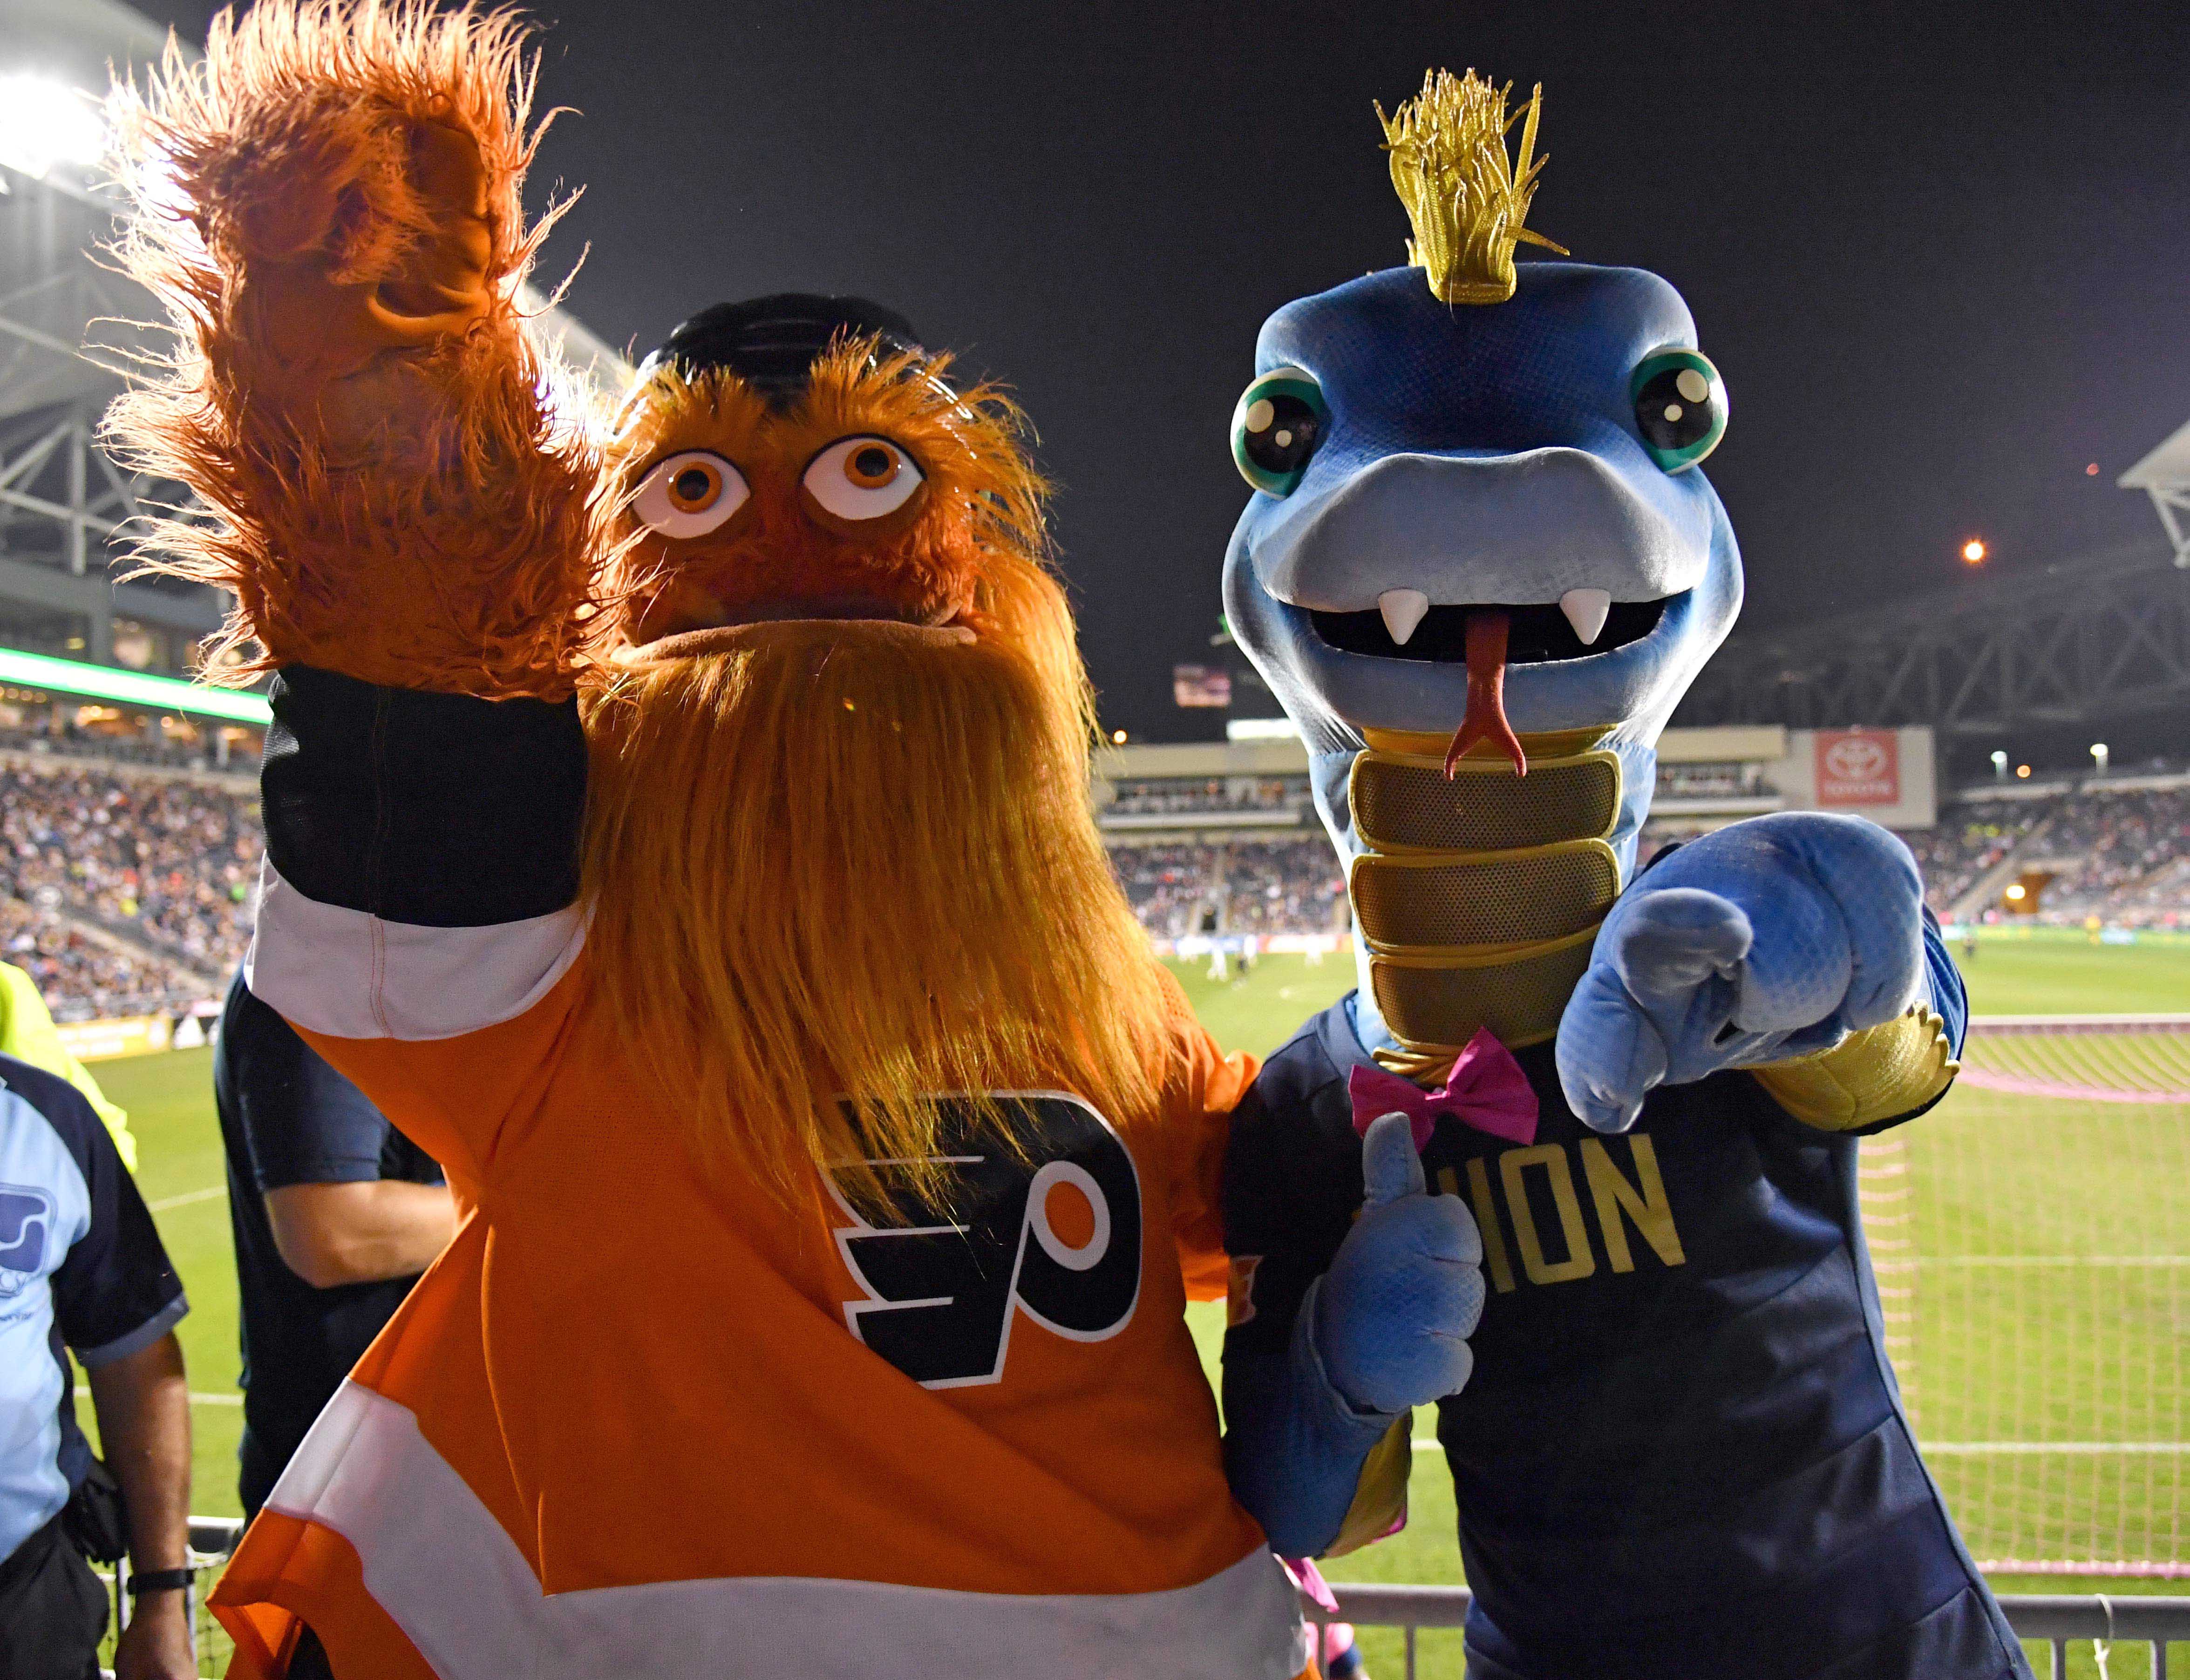 Gritty and Phang at Talen Energy Stadium